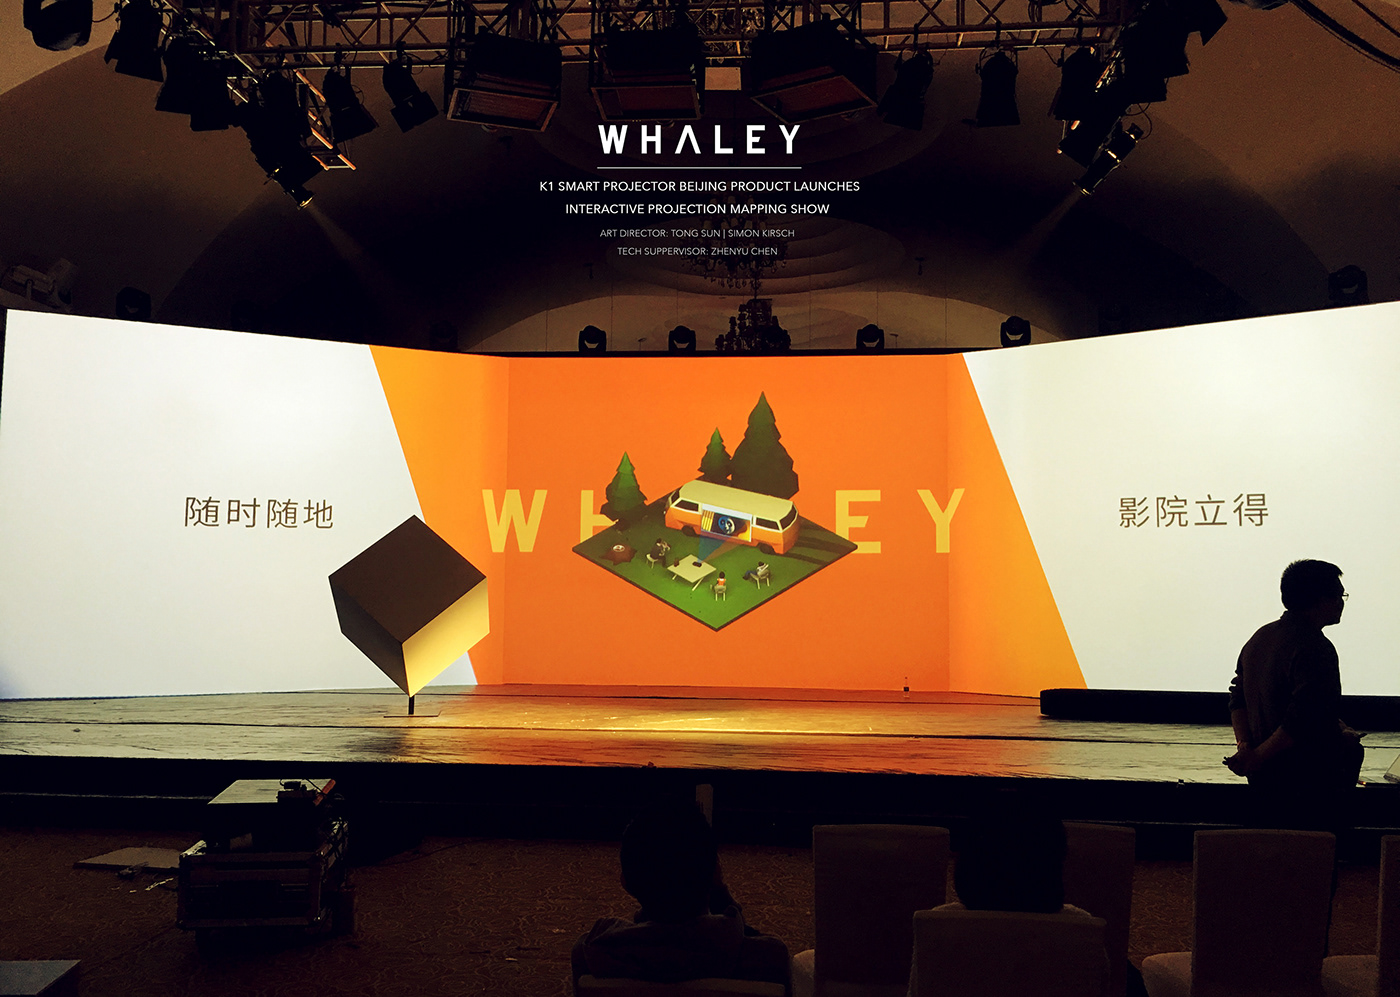 projection mapping Projector beijing product launch mapping show K1 Smart Projector